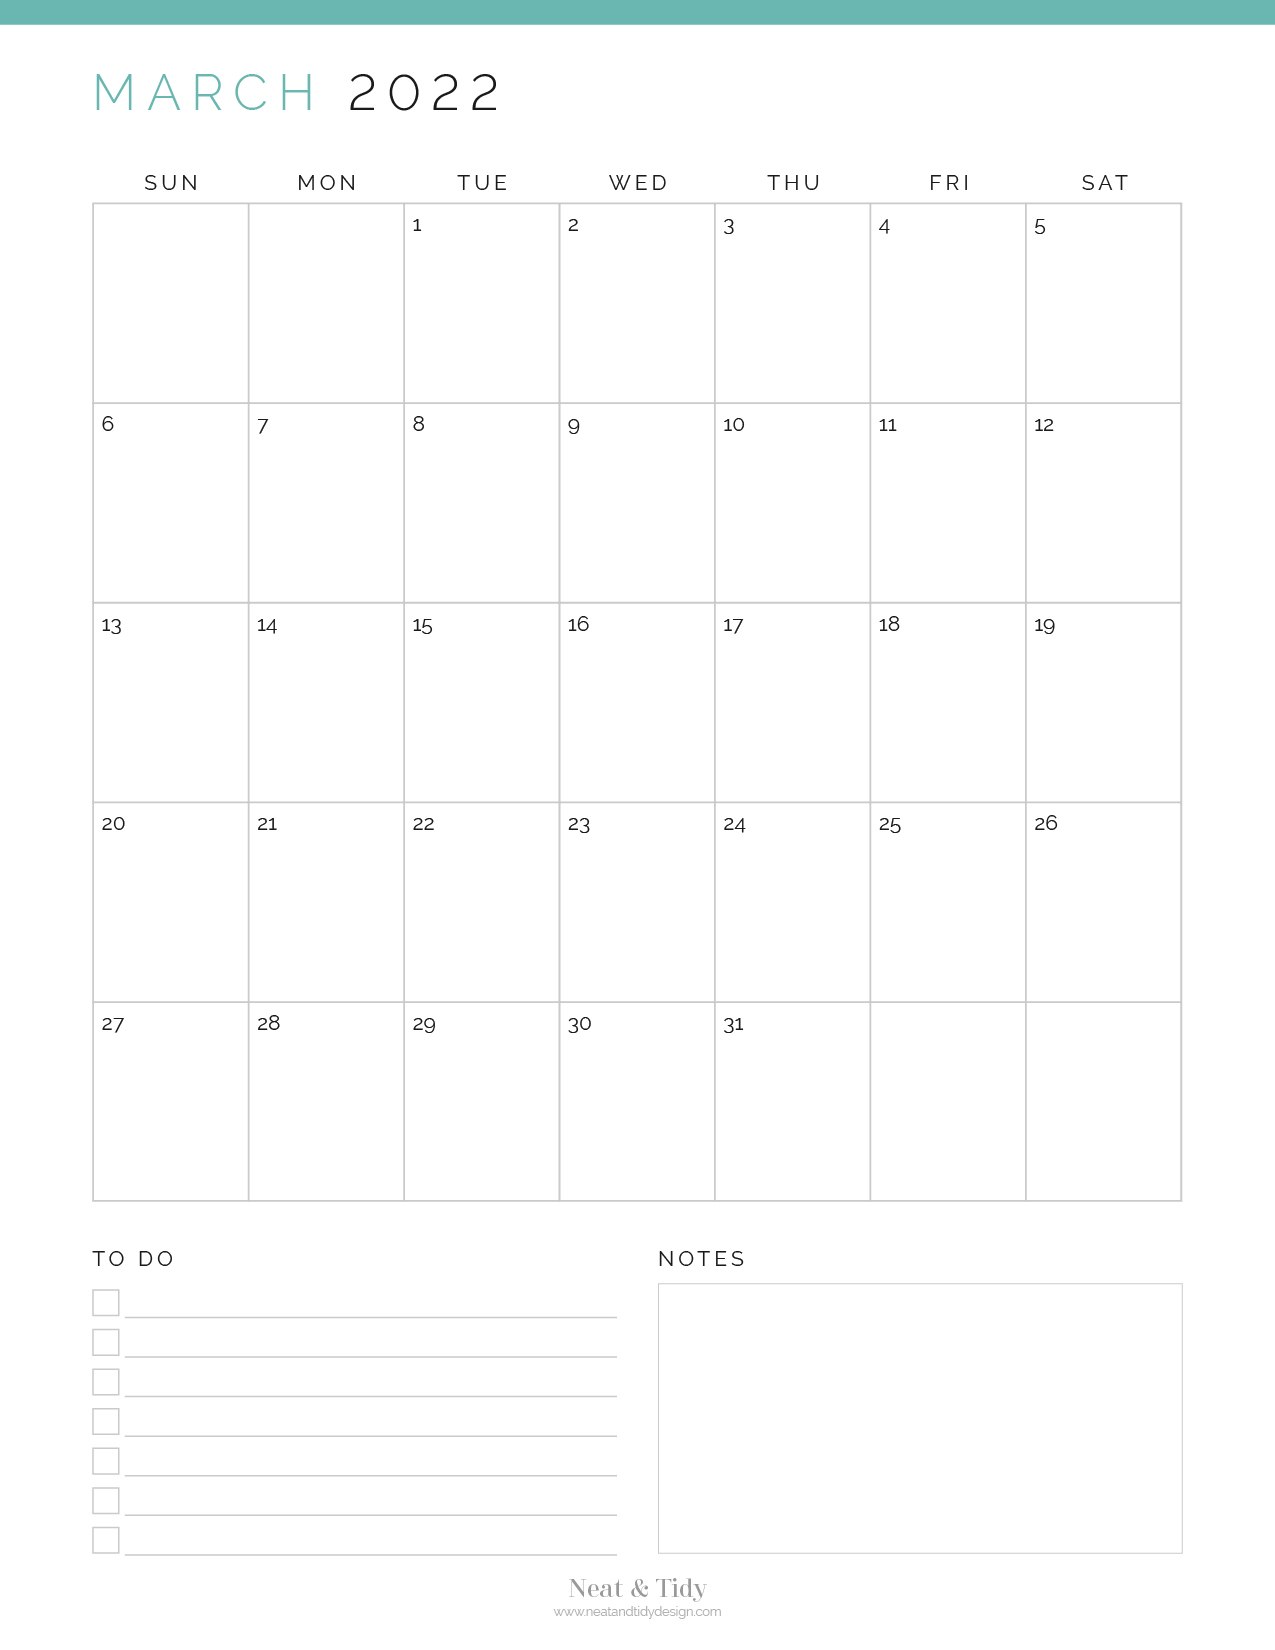 Monthly Planner - Neat and Tidy Design